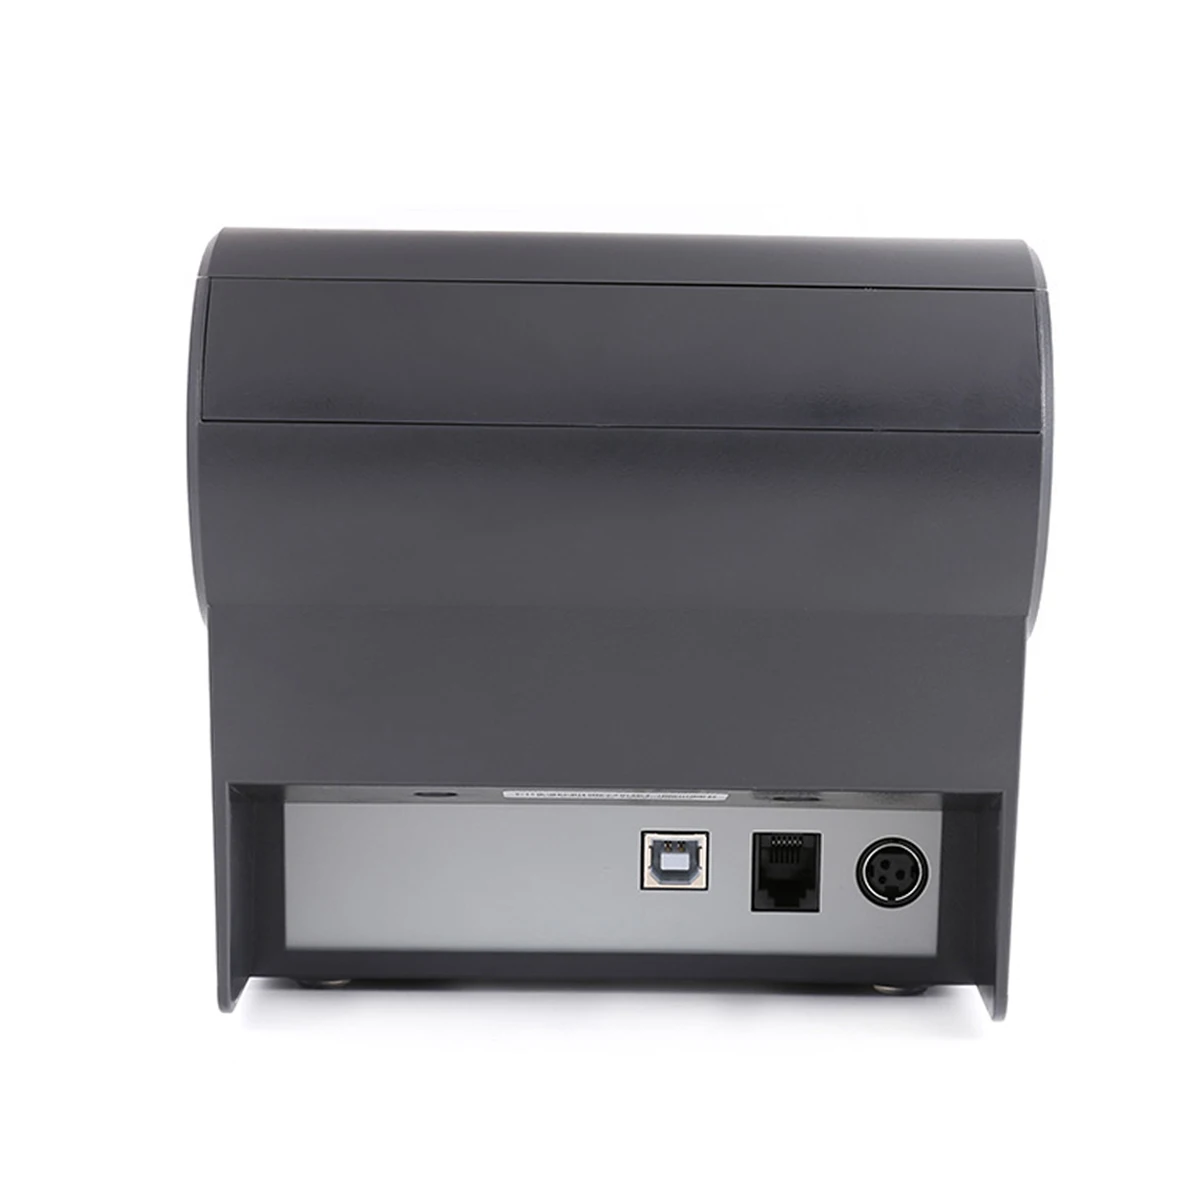 HSPOS 80mm Thermal Printer POS Receipt Printer USB+Parallel Interface with Auto Cutter